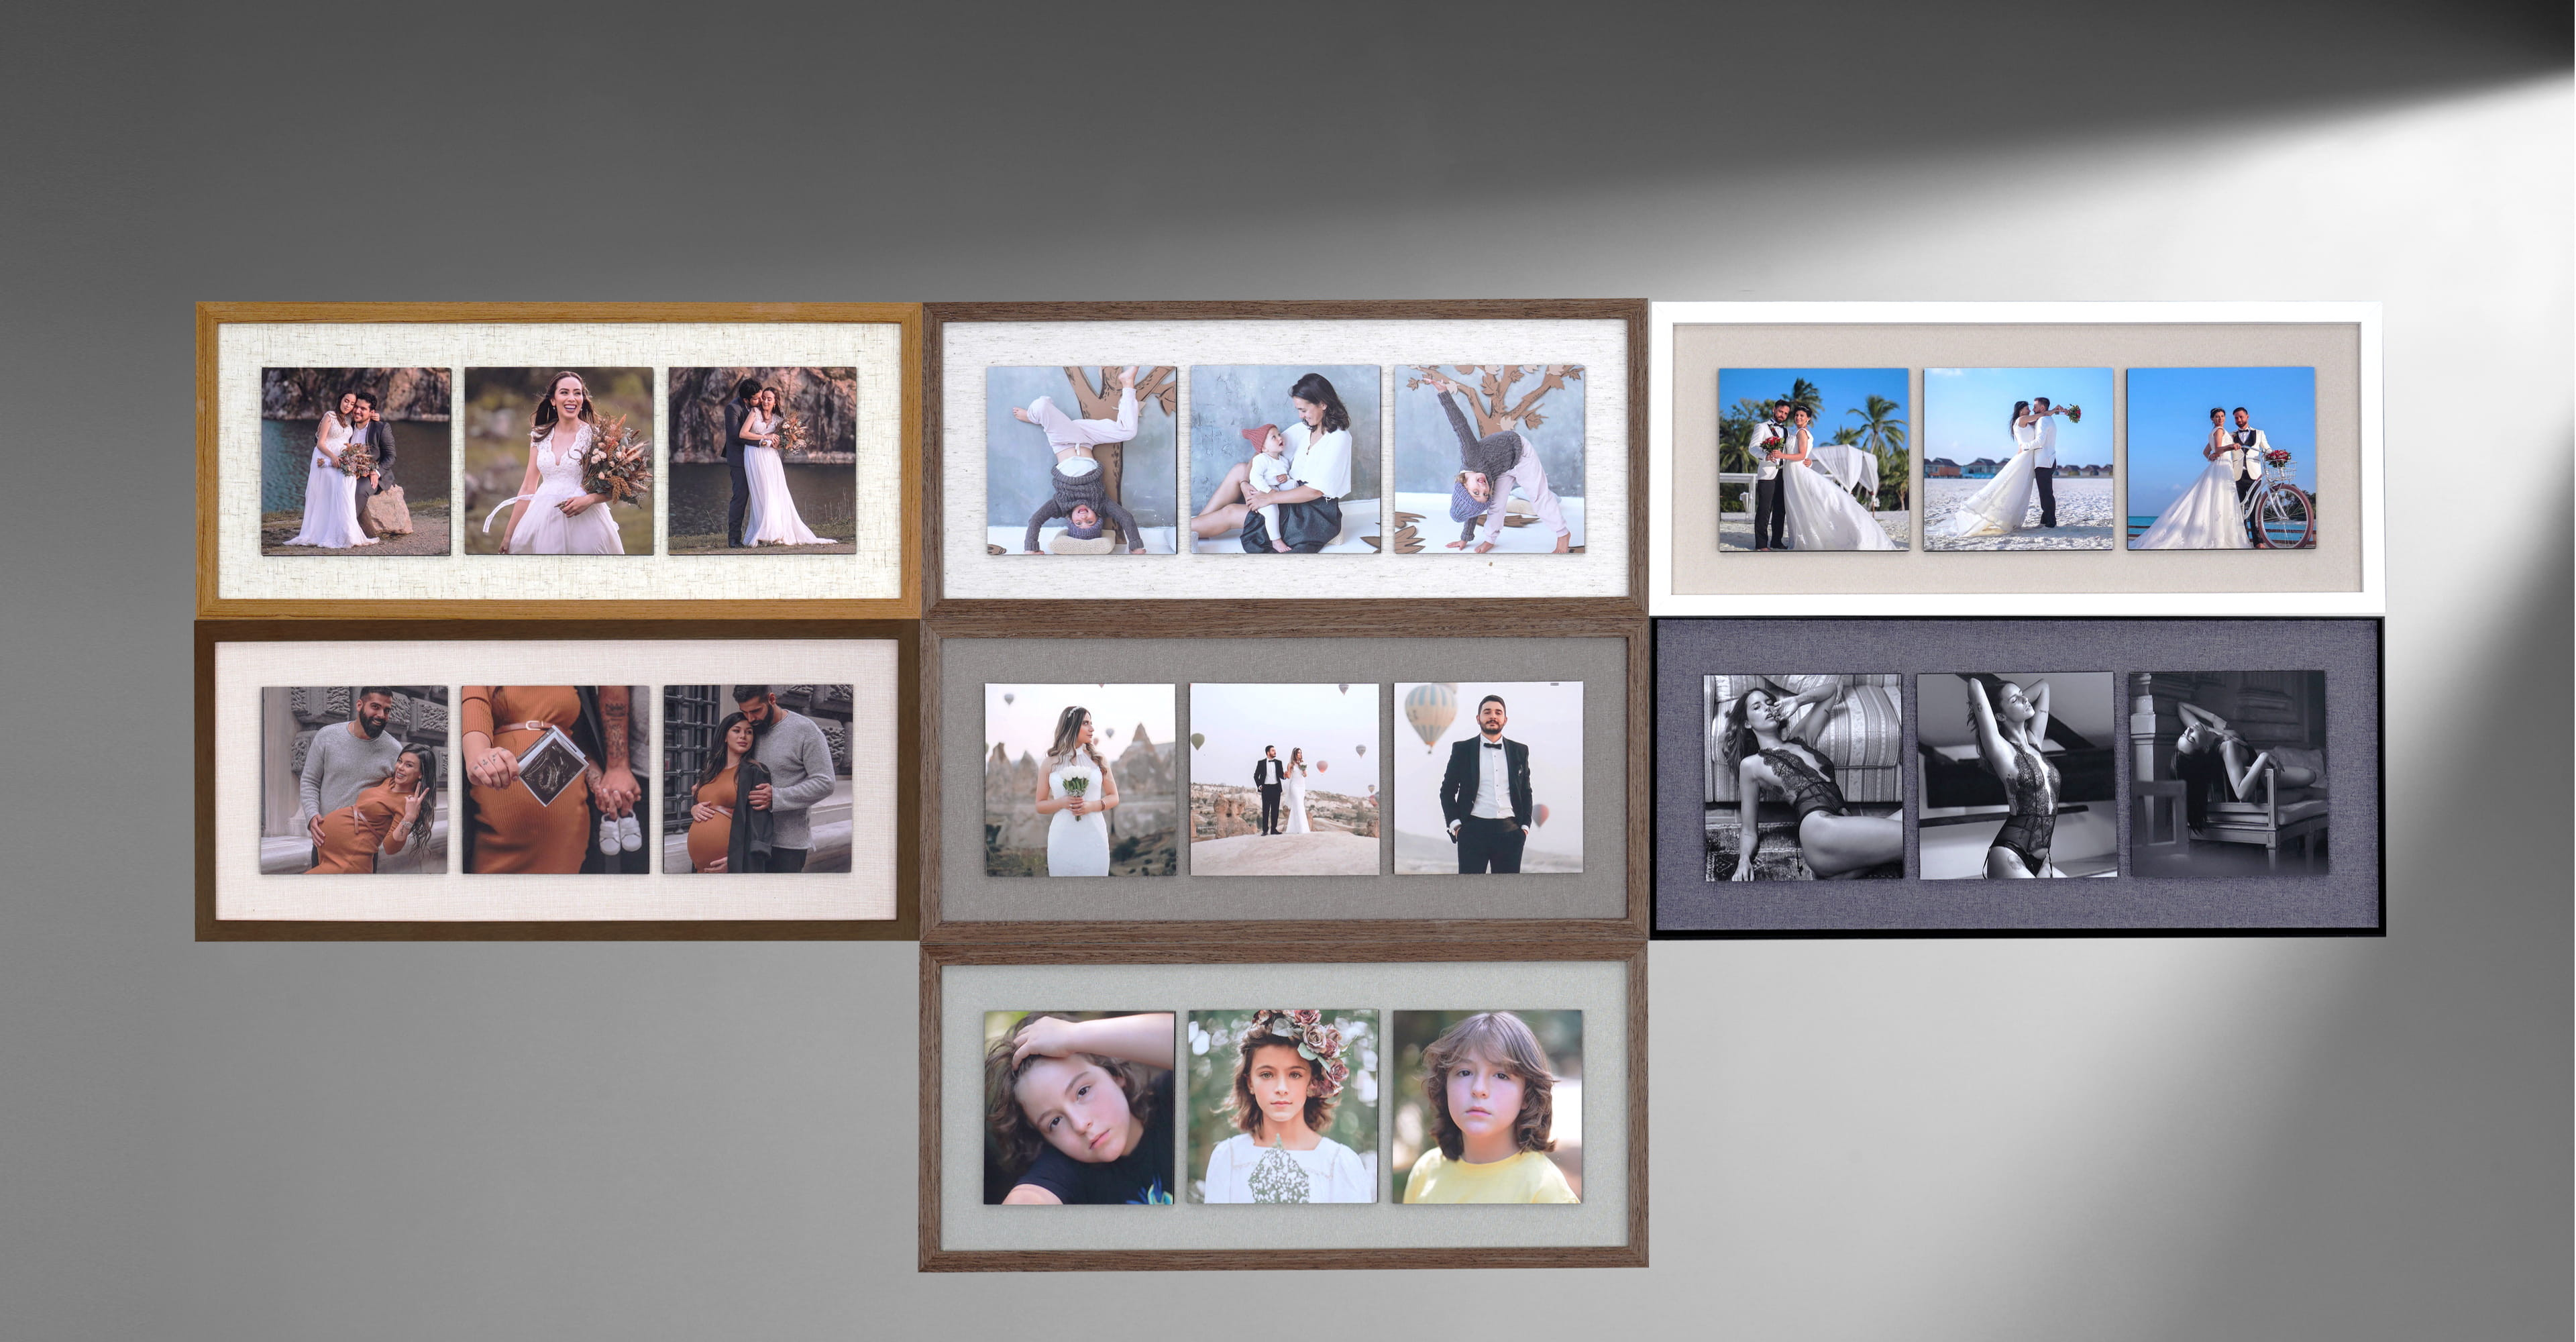 examples of collage frames in different frame styles and backdrop colors